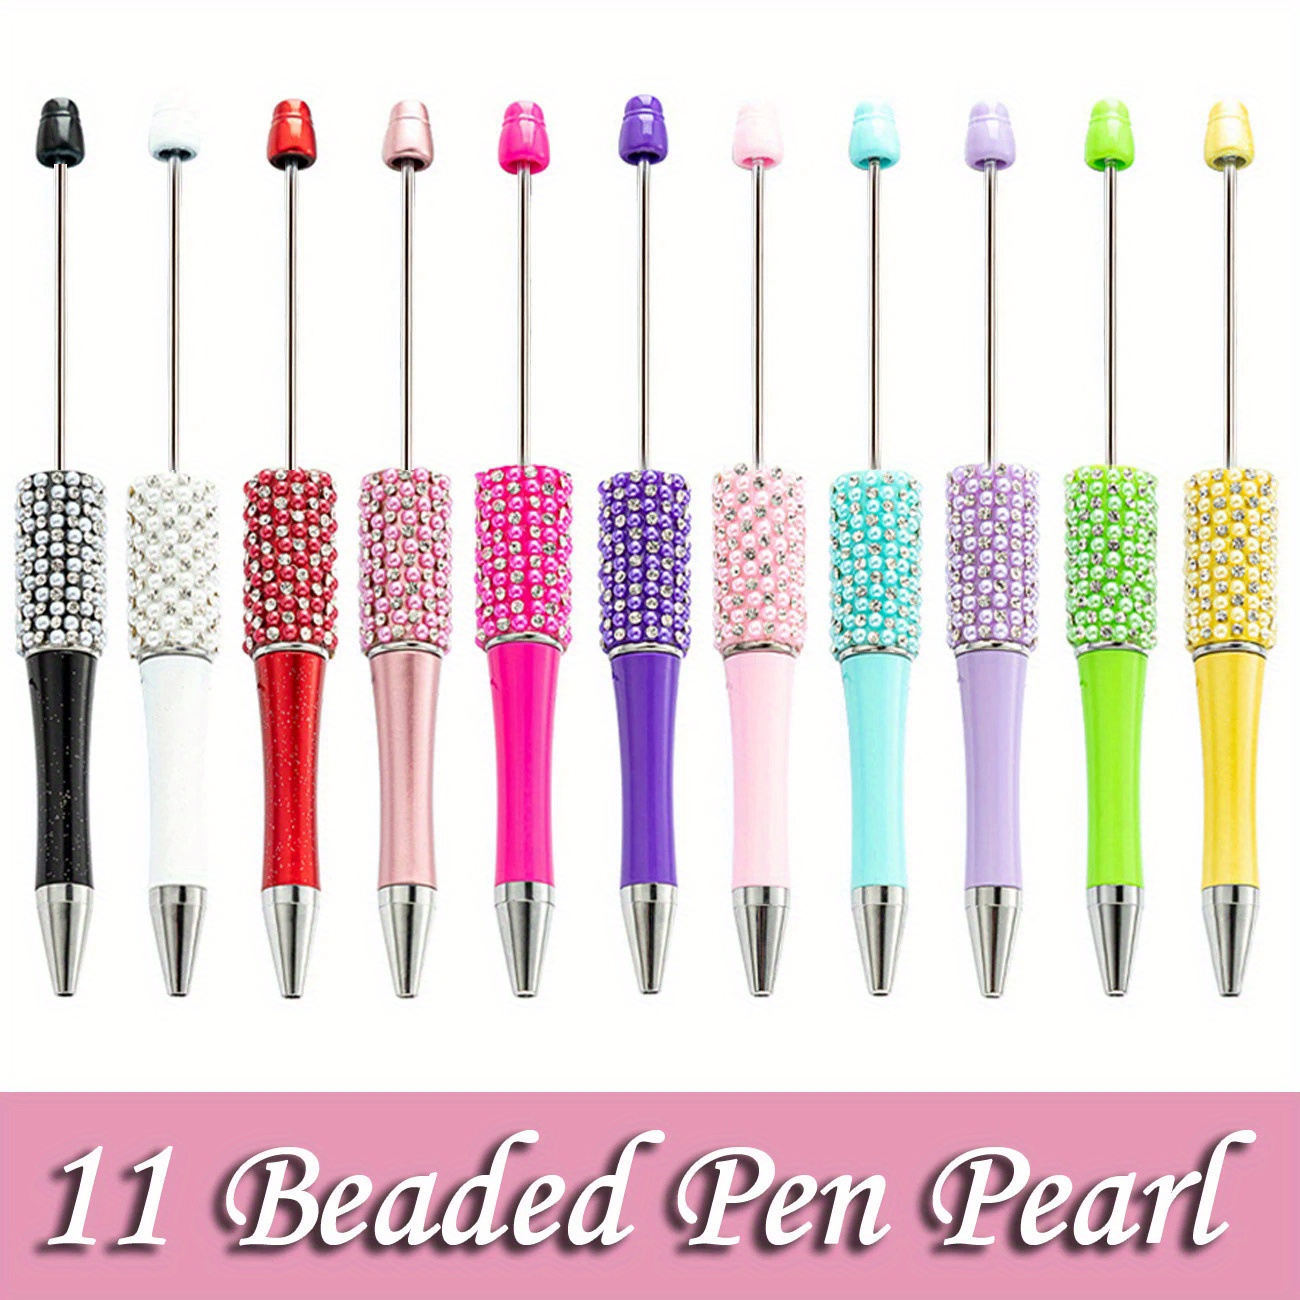 

11-piece Diamond & Pearl Beaded Ballpoint Pen Set - Creative Diy Craft Kit, Twist Closure, Medium Point, Ideal For School, Office, And Gifts Pens For Beads Beaded Pen Kits